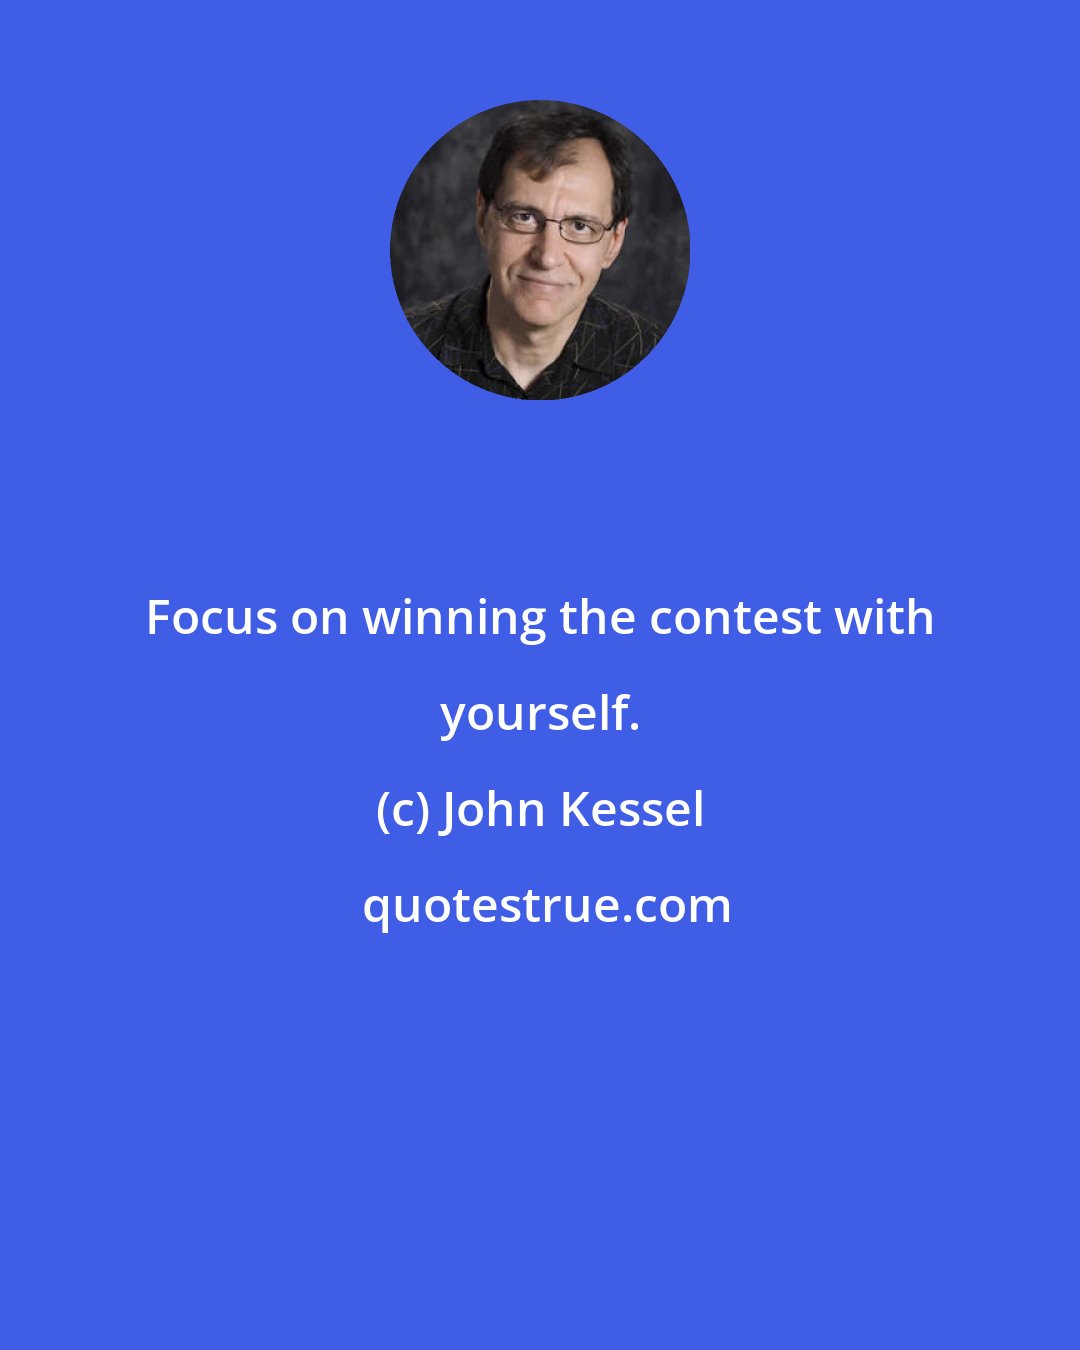 John Kessel: Focus on winning the contest with yourself.